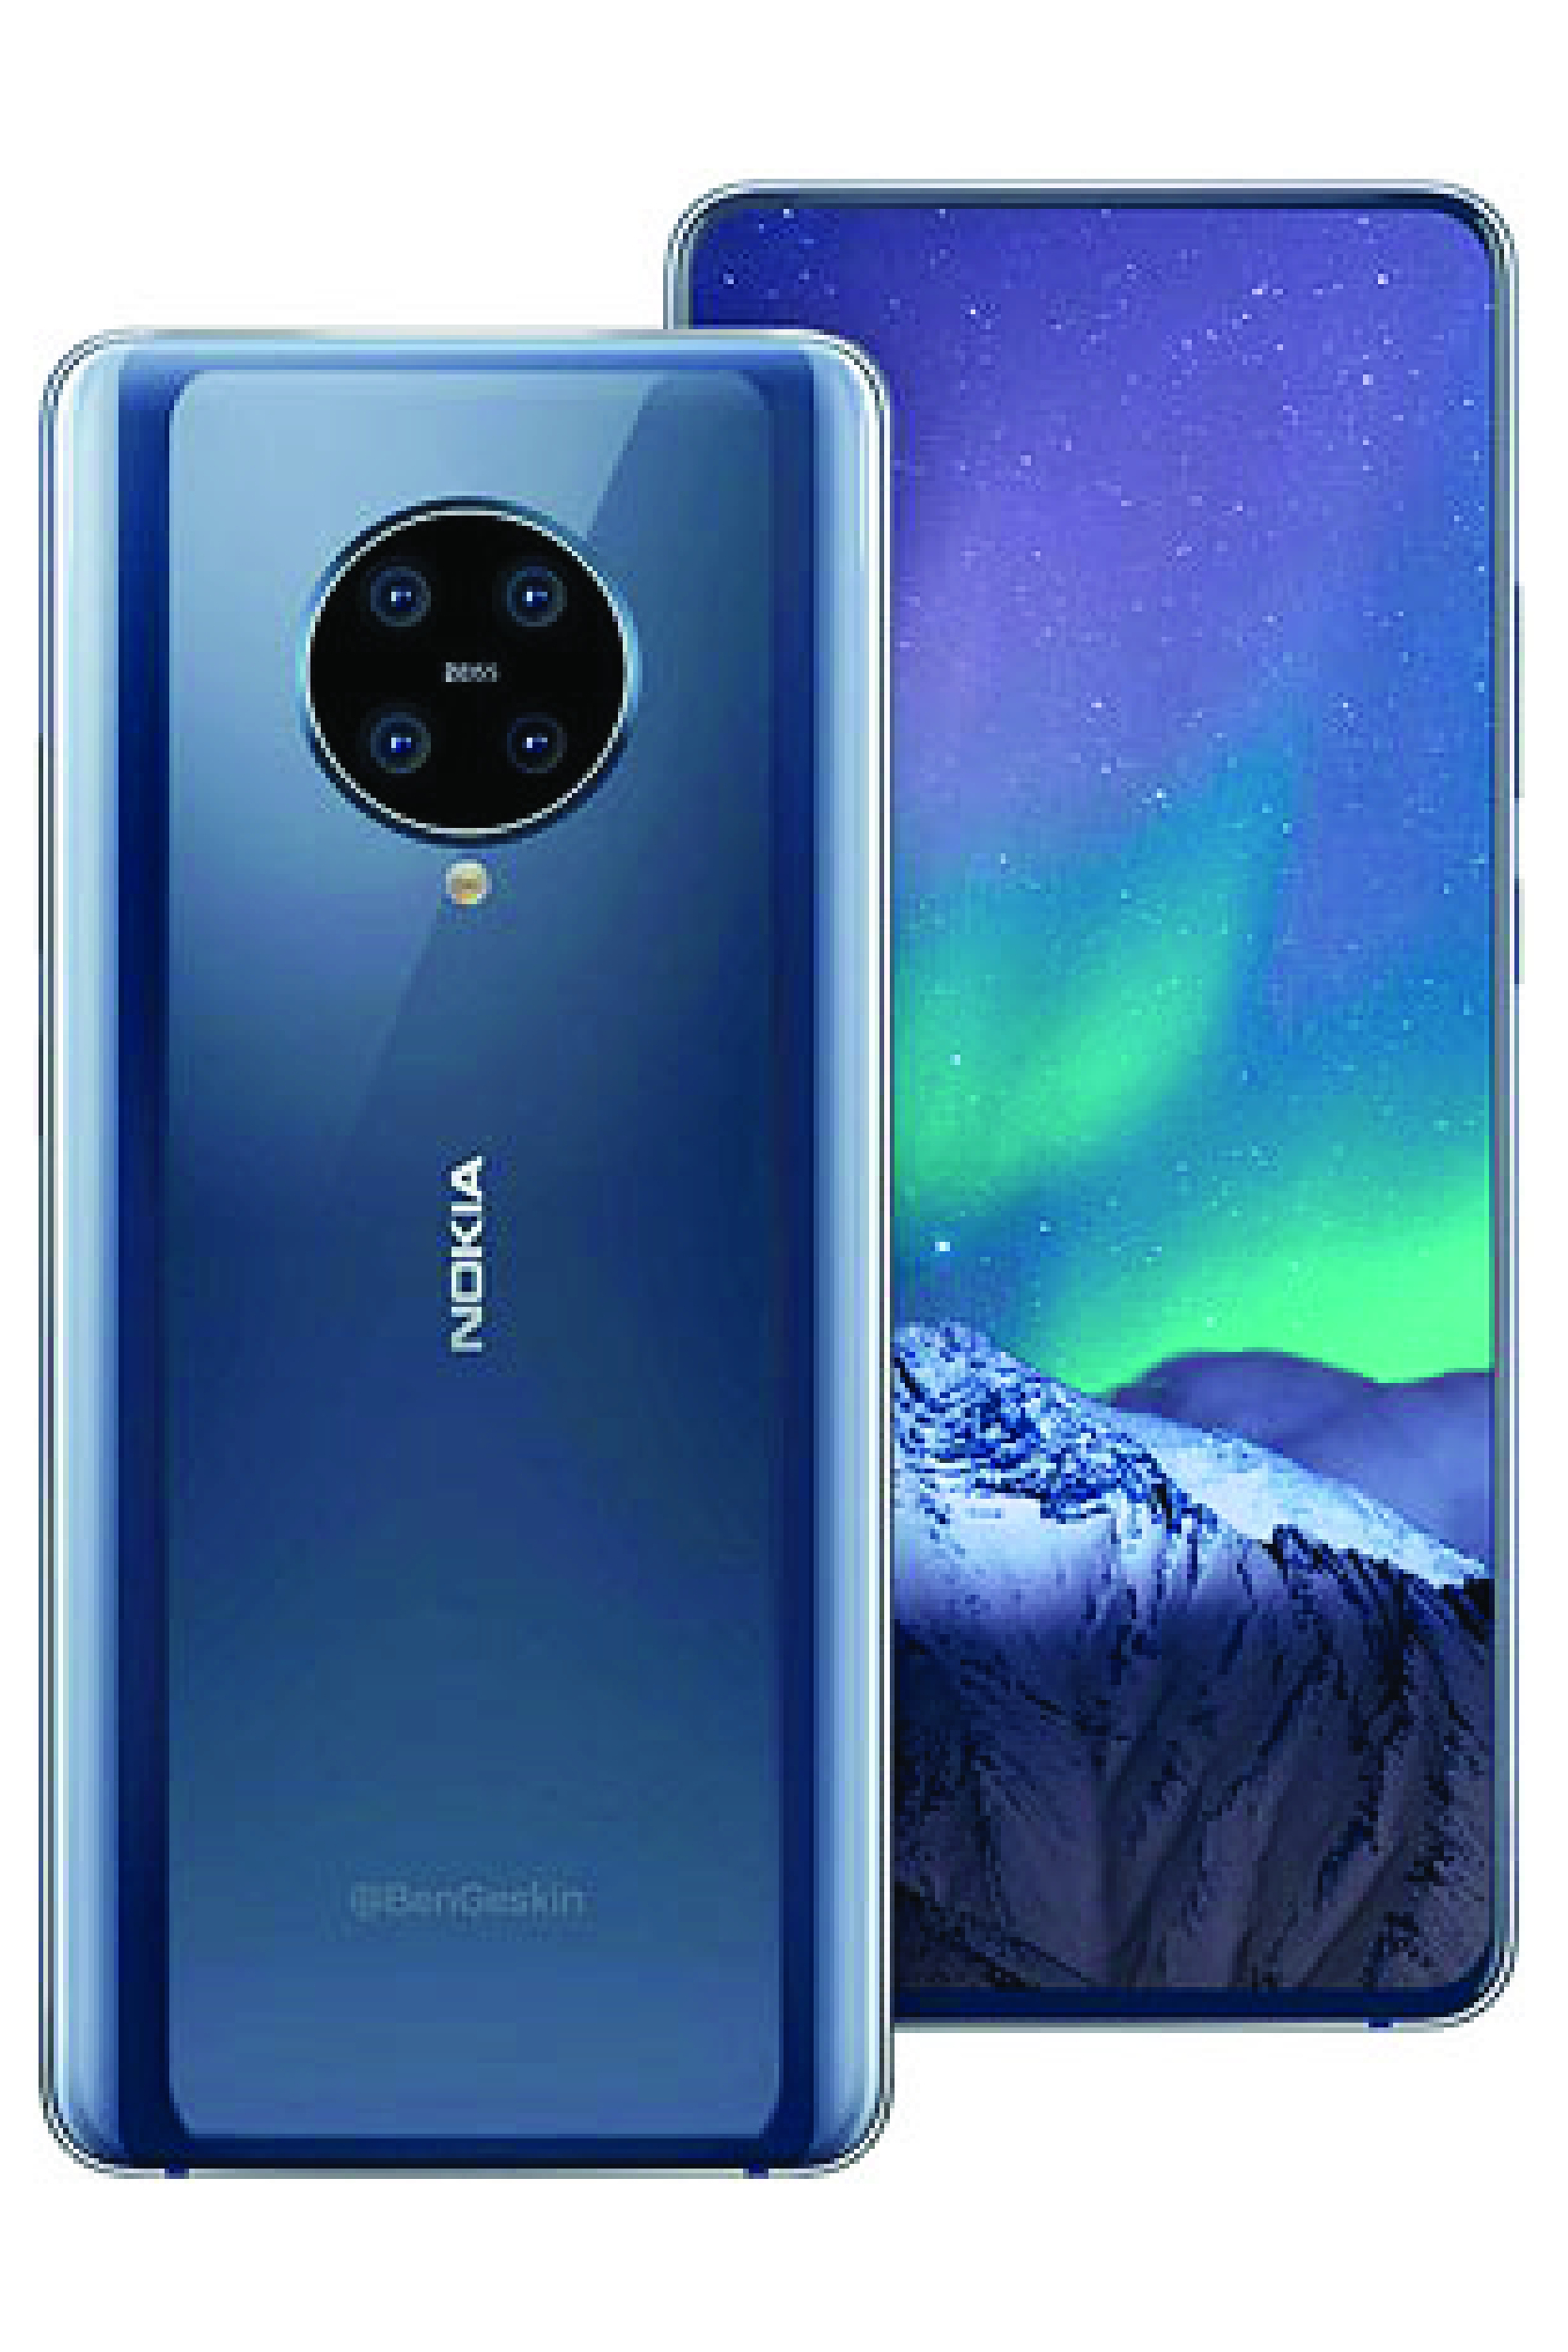 Nokia 9.3 Pure View Price in Pakistan & Specs: Daily Updated | ProPakistani